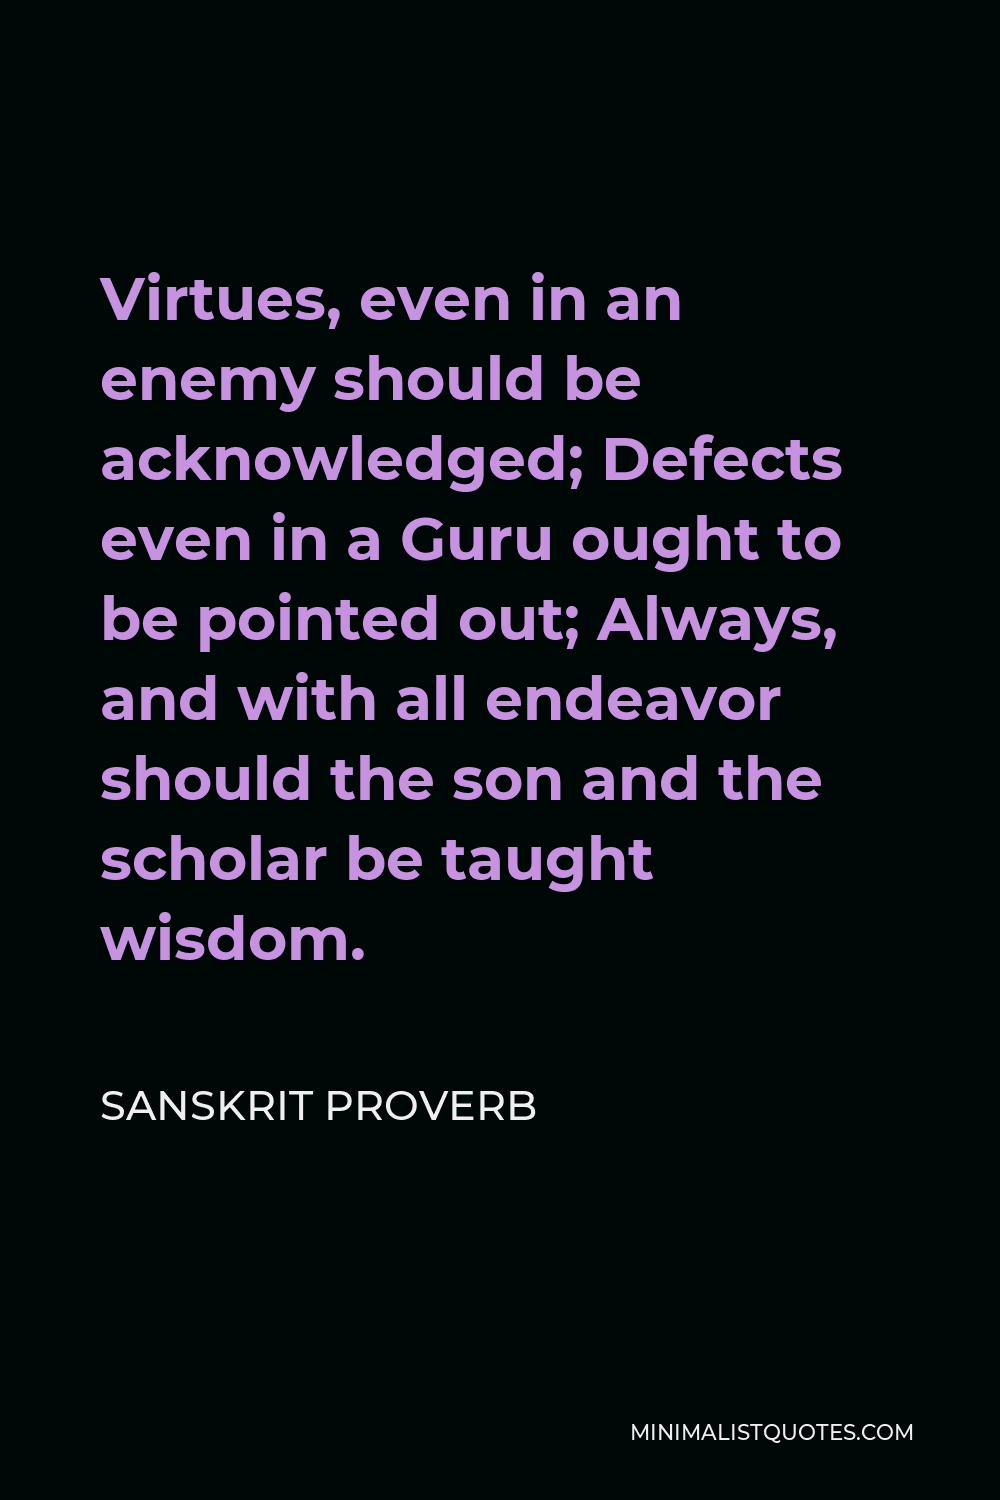 Sanskrit Proverb Quote - Virtues, even in an enemy should be acknowledged; Defects even in a Guru ought to be pointed out; Always, and with all endeavor should the son and the scholar be taught wisdom.